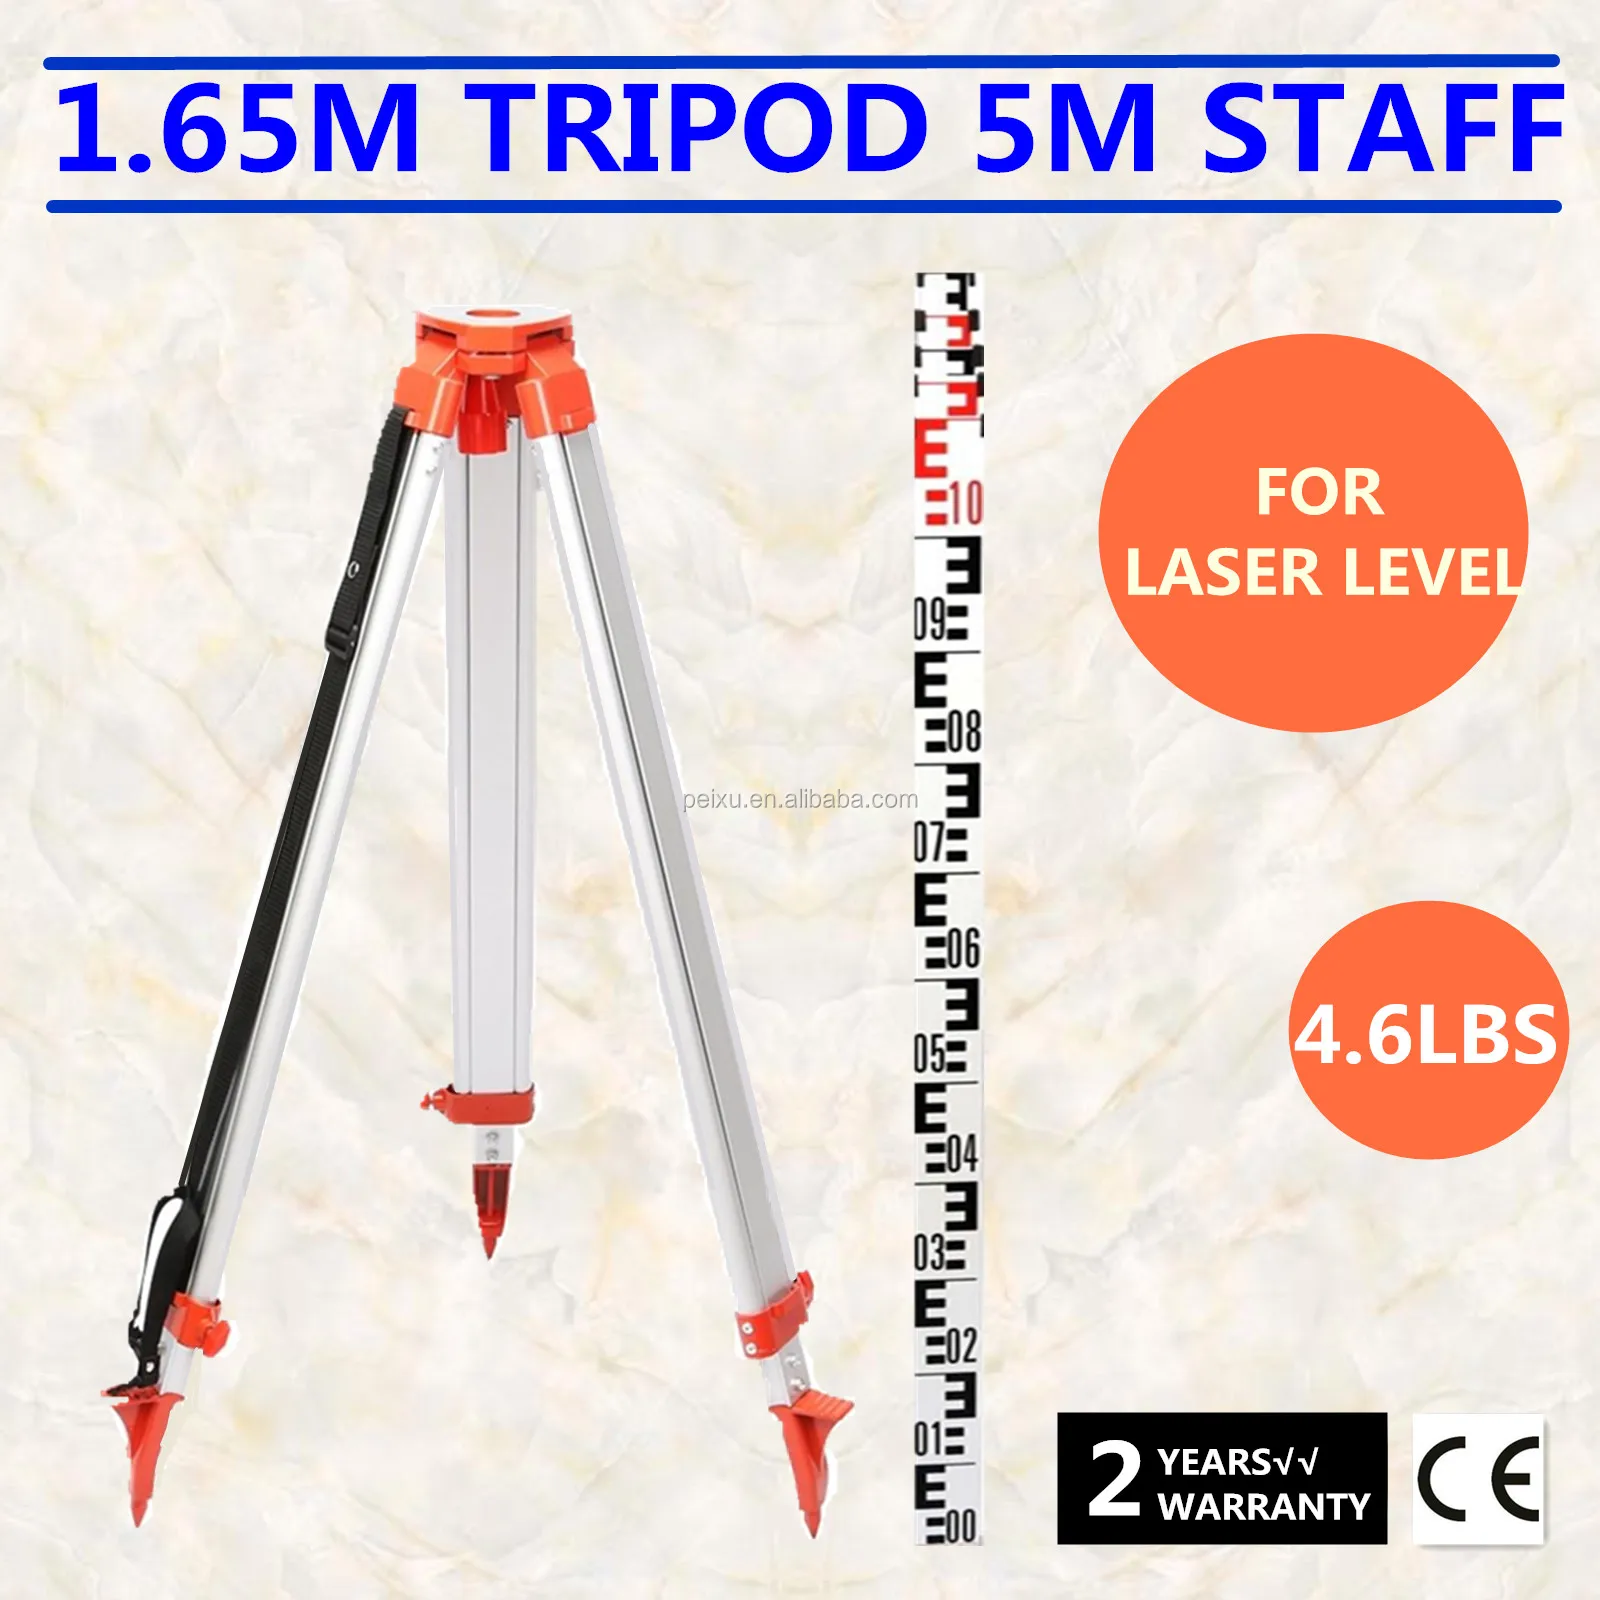 Tripod & 5m Survey levelling Staff For Rotary Auto Levels and Lasers 